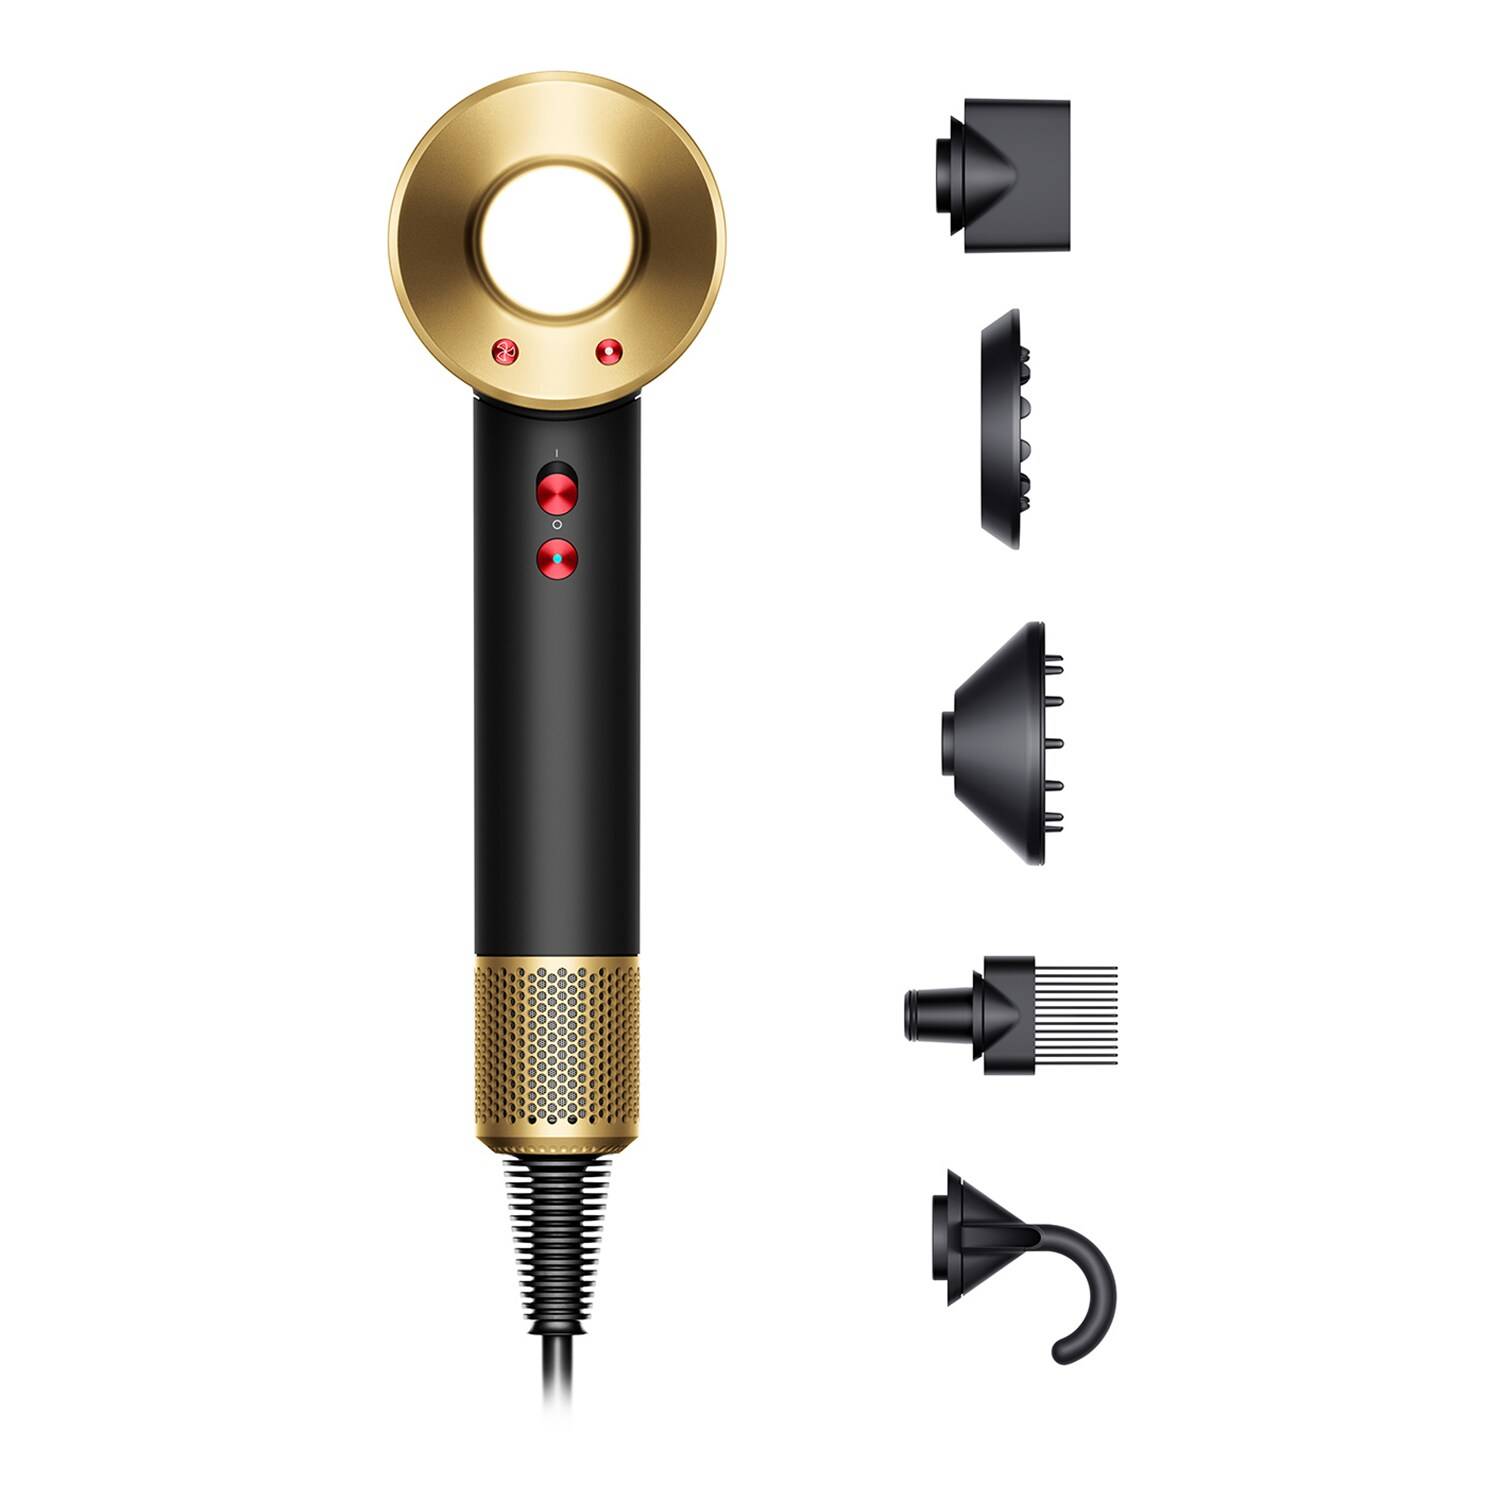 Dyson Supersonic Hair Dryer In Onyx Gold